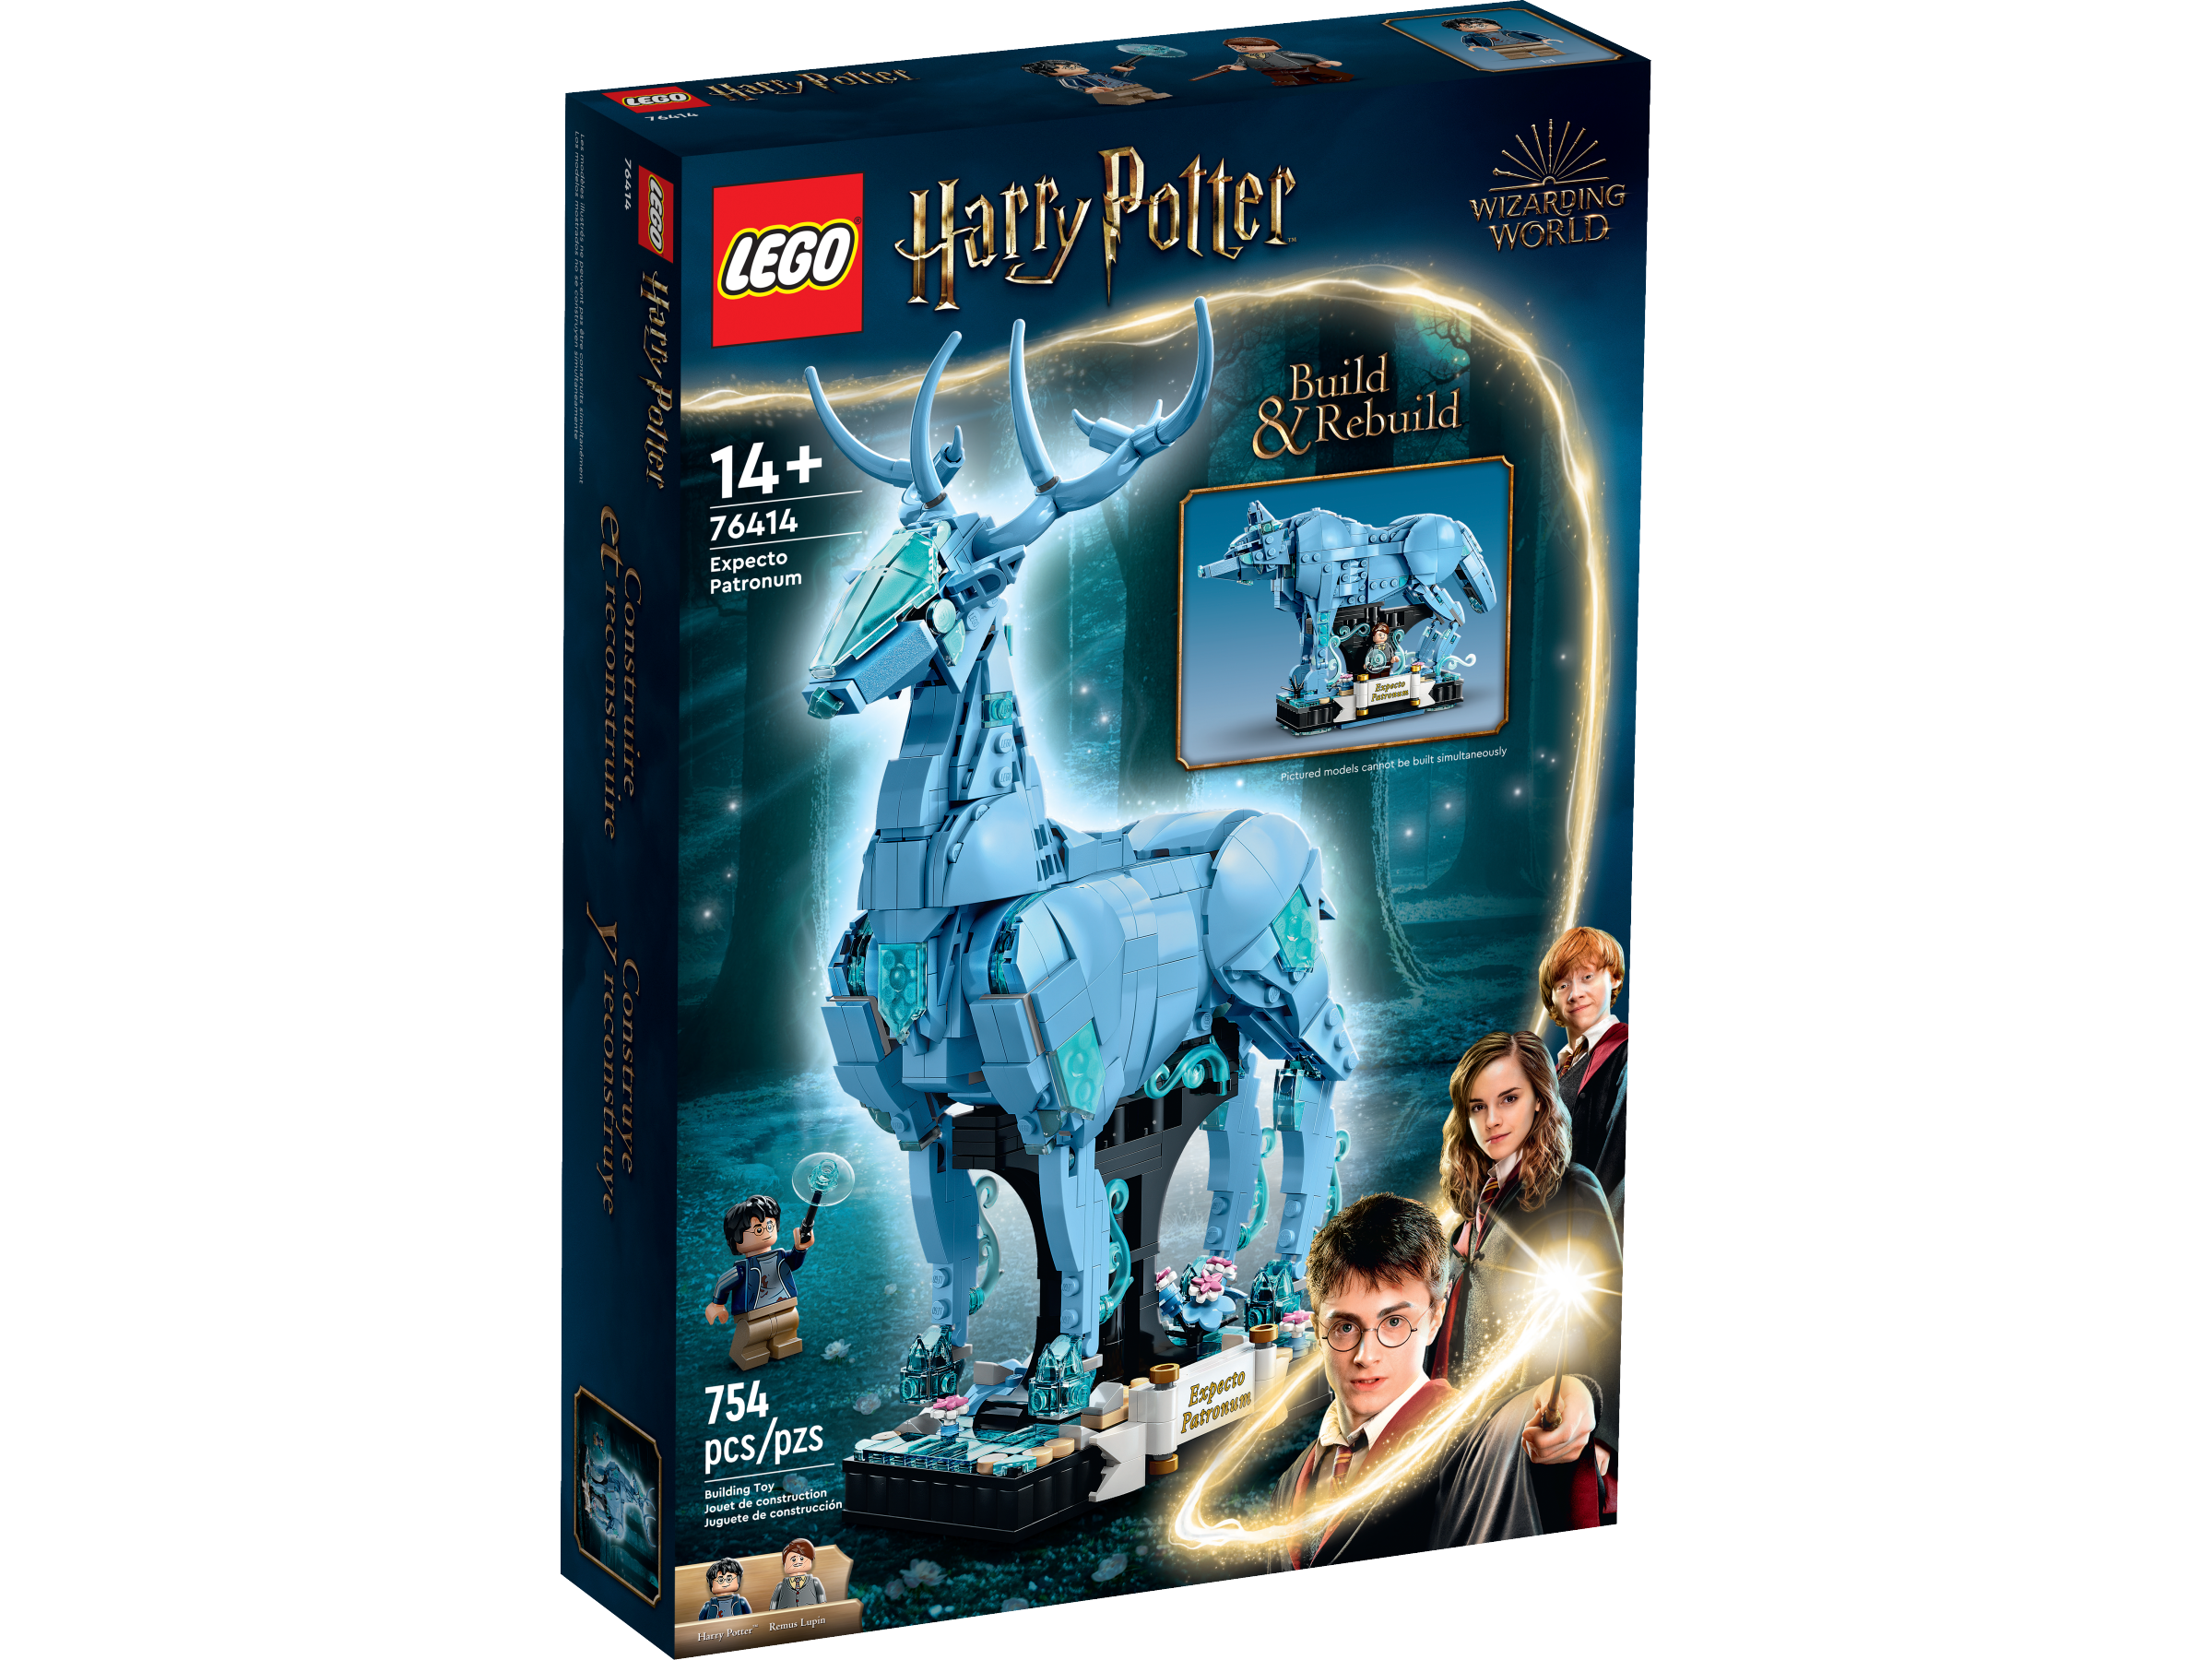 Expecto Patronum 76414 | Harry Potter™ | Buy online at the